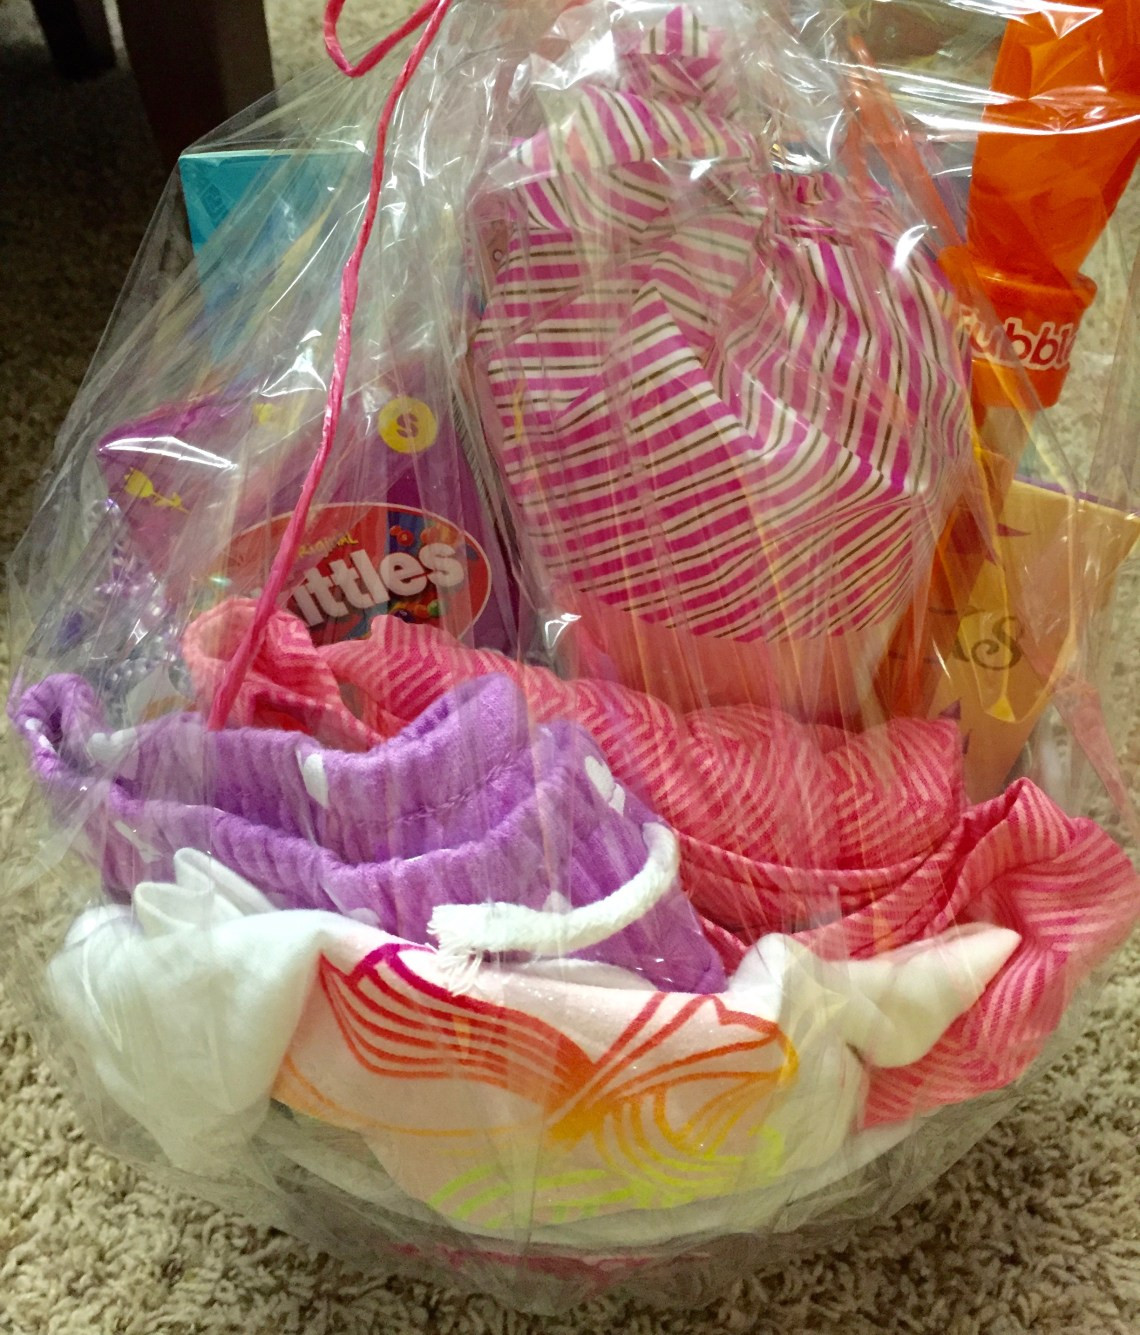 DIY Easter Basket For Toddler
 How to Make DIY Easter Baskets Toddlers Will Love – Thirty